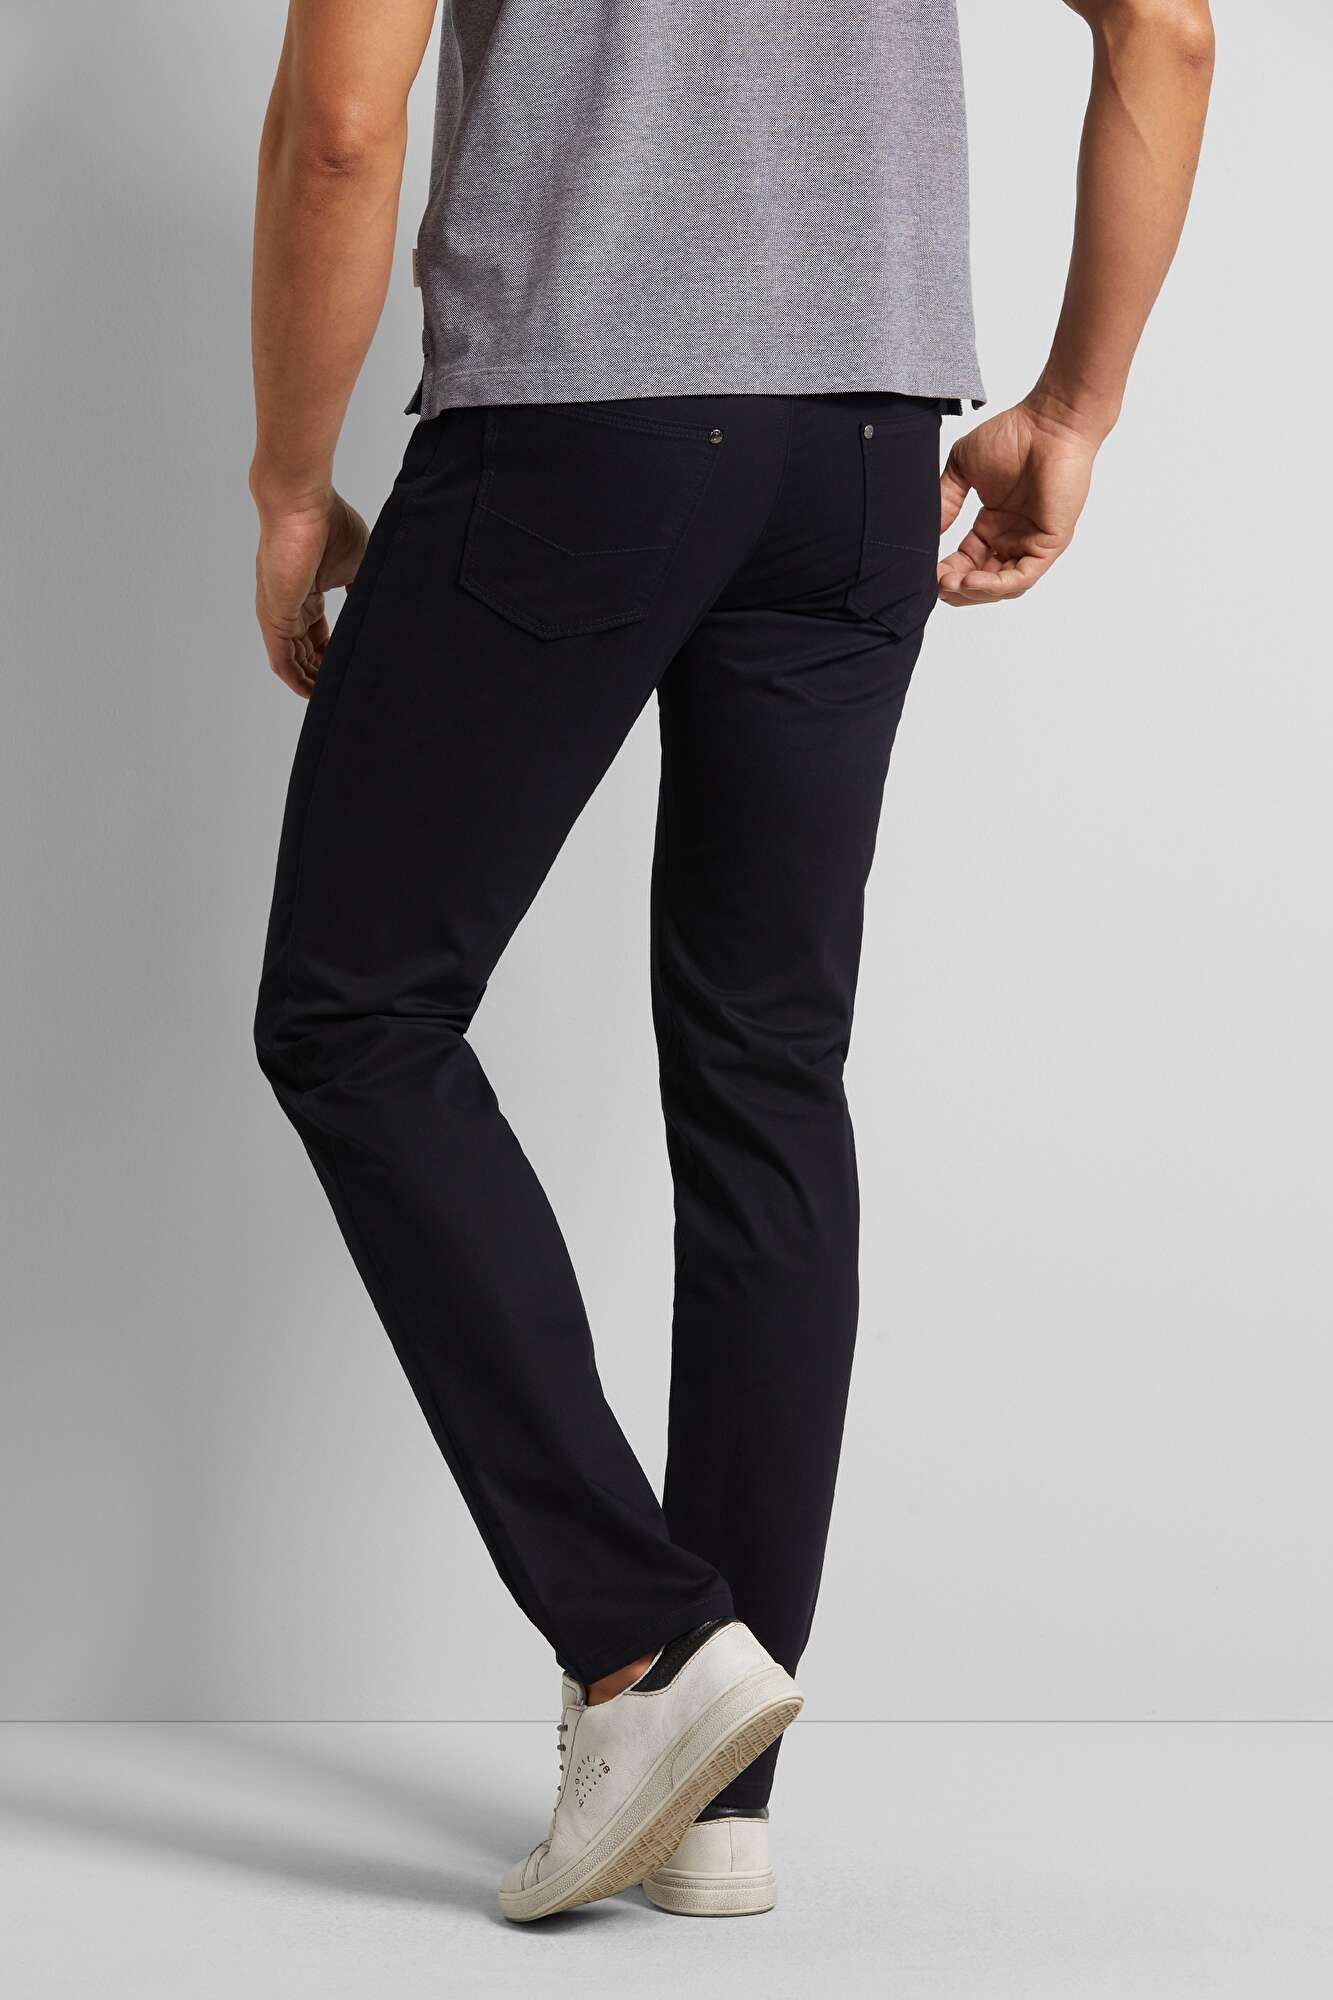 five-pocket with Constant Colour stretch in bugatti navy 